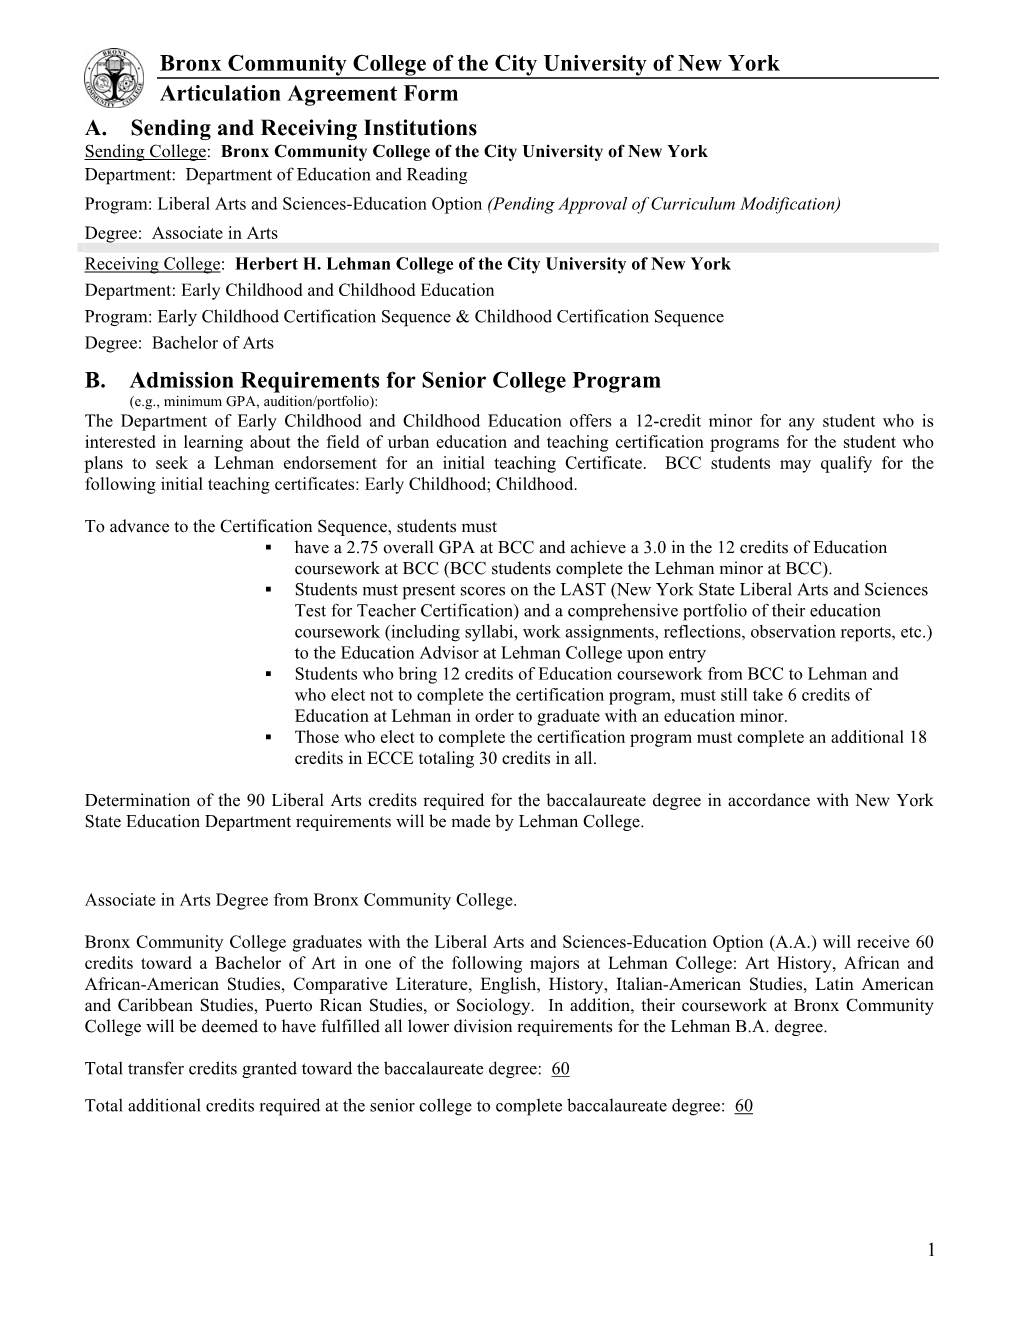 Bronx Community College of the City University of New York Articulation Agreement Form